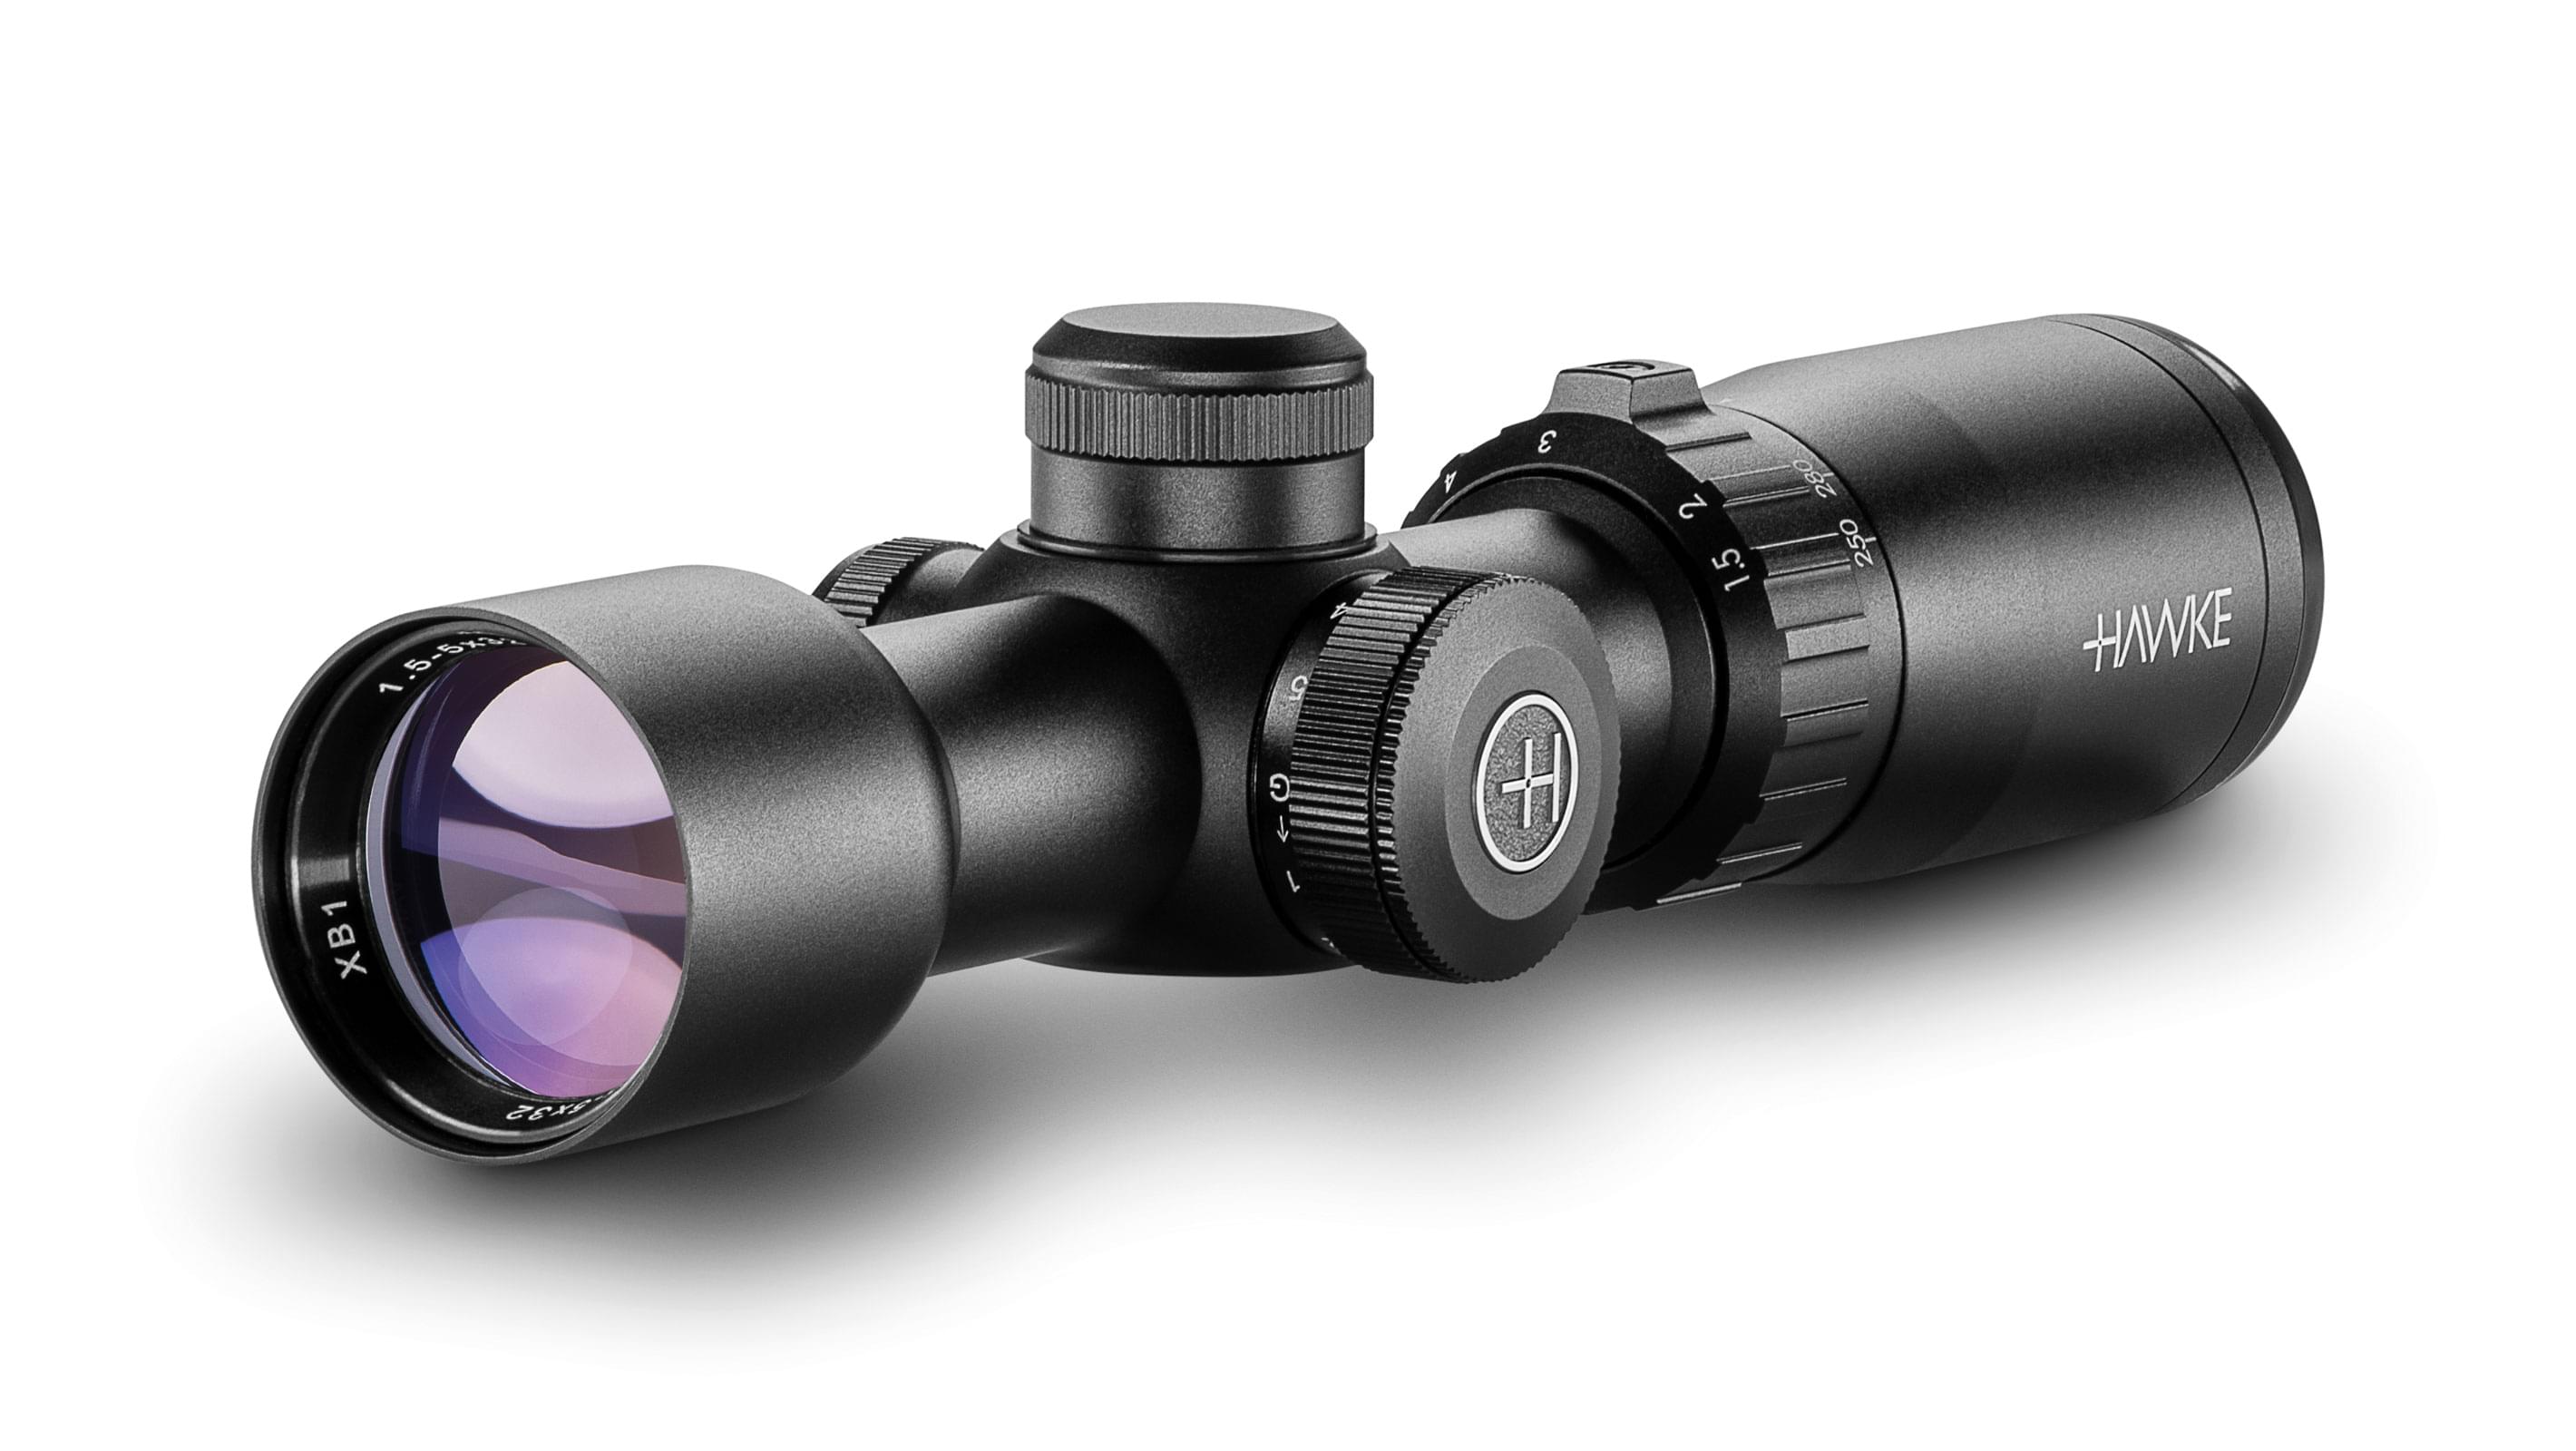 Objective End View Of The Hawke XB1 1.5-5x32 SR Scope